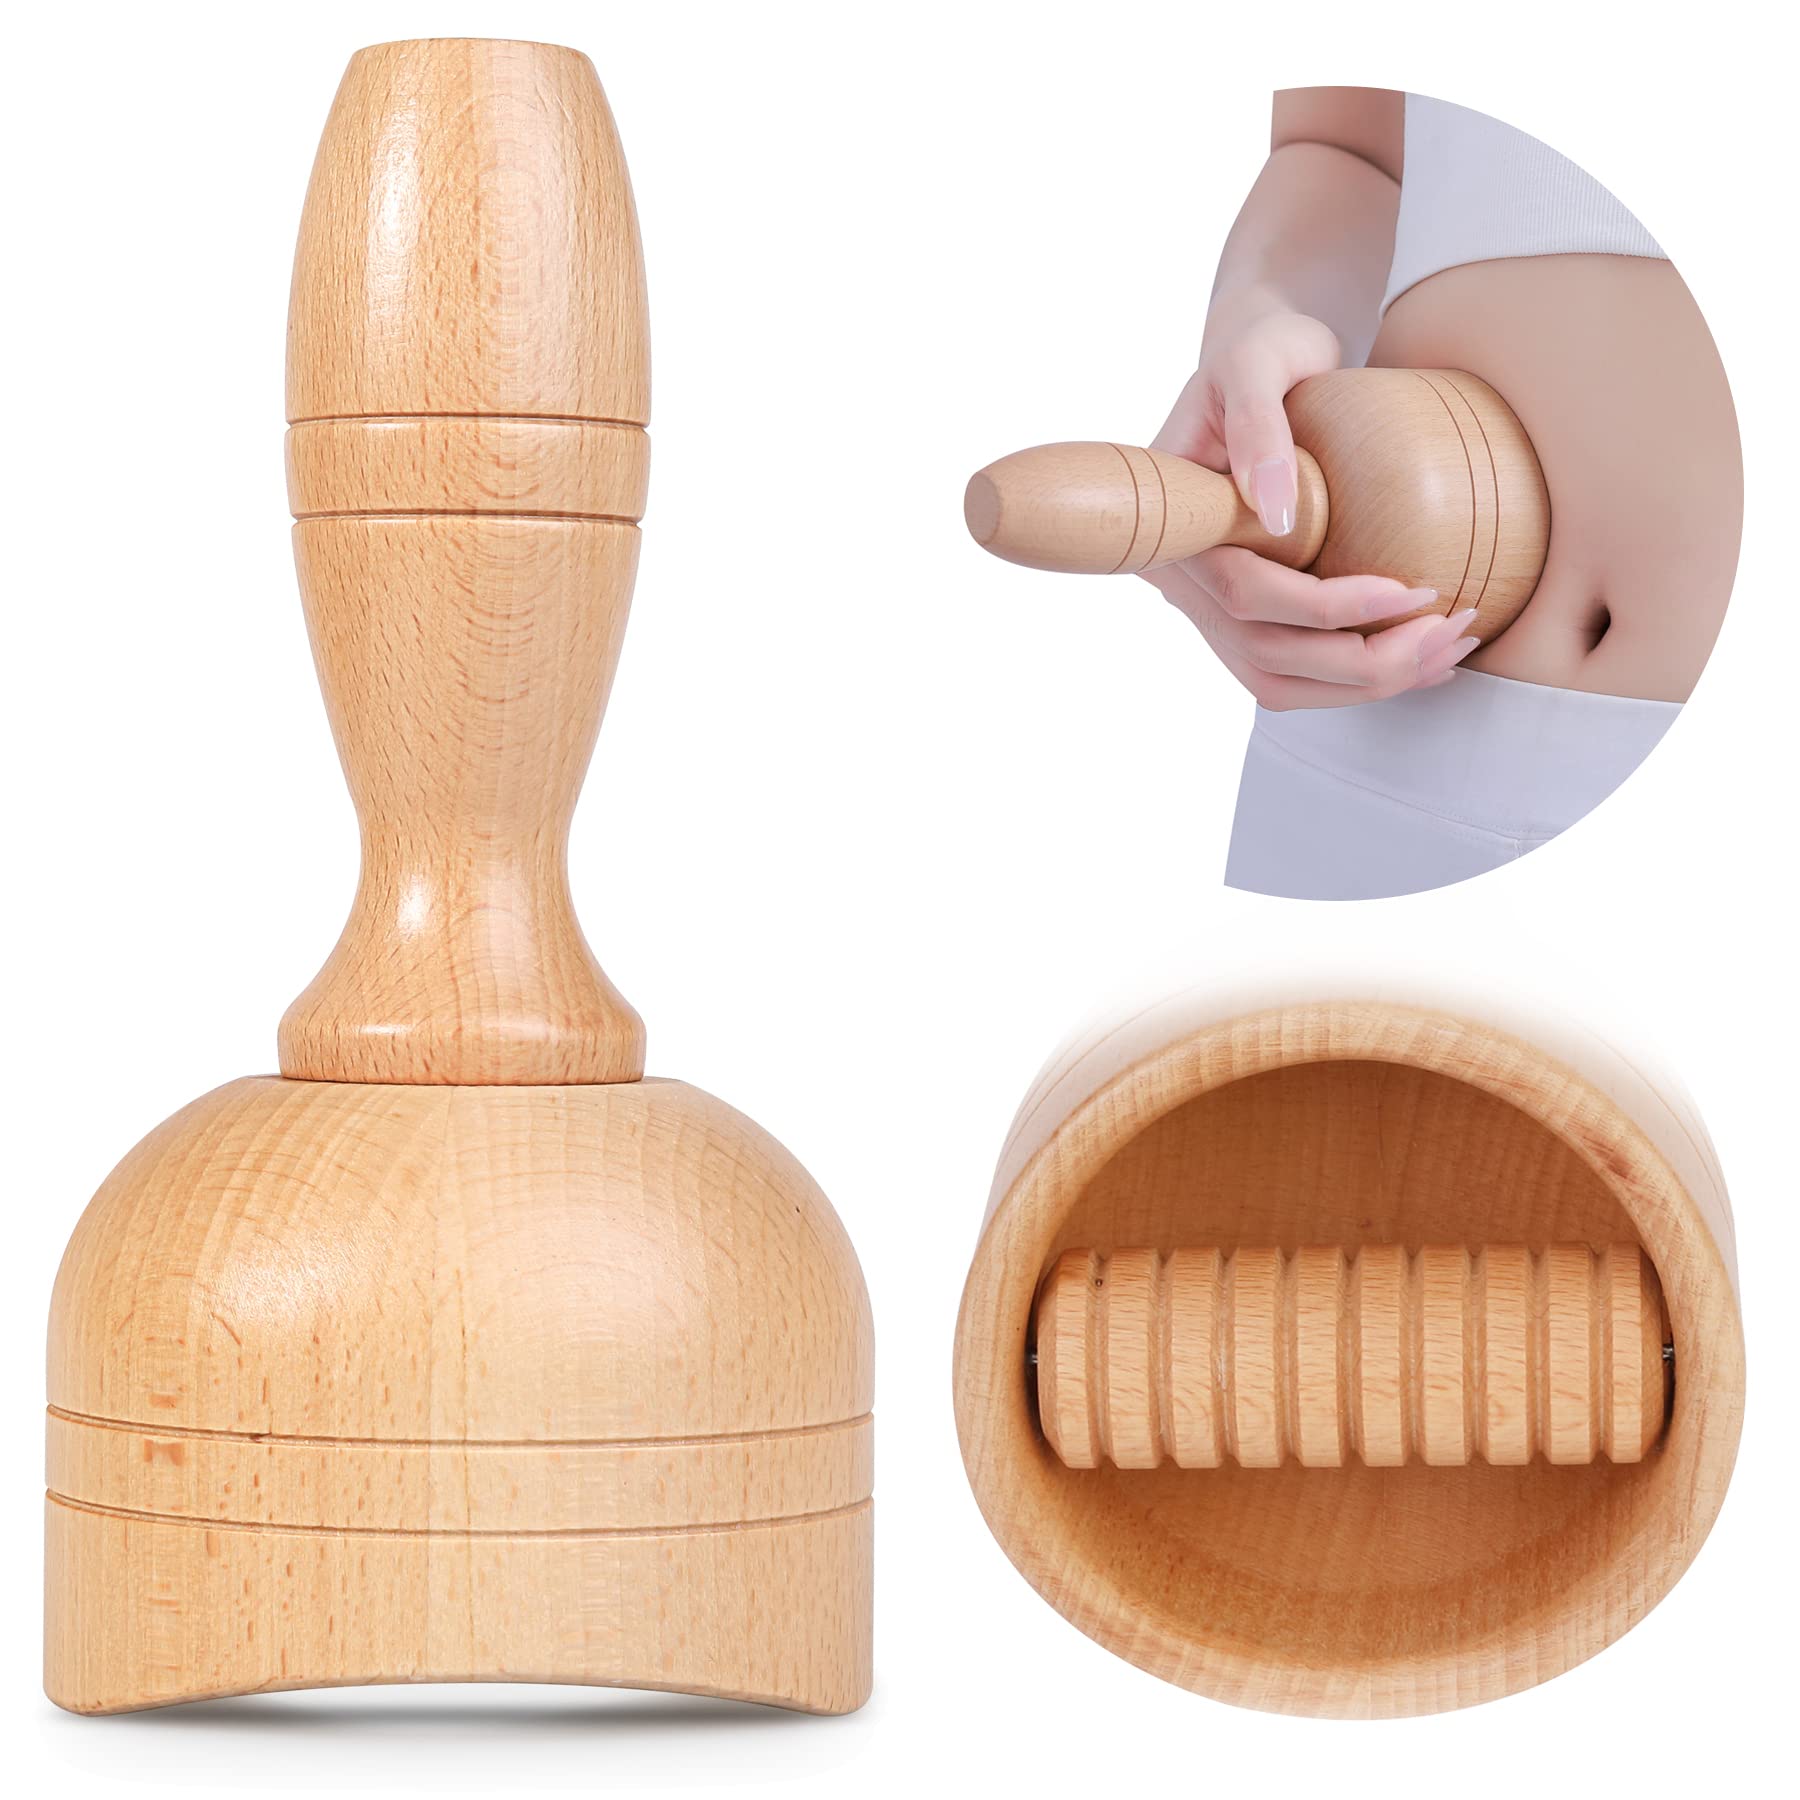 Wooden Swedish Cup with Roller - Beauty Spa Virtual